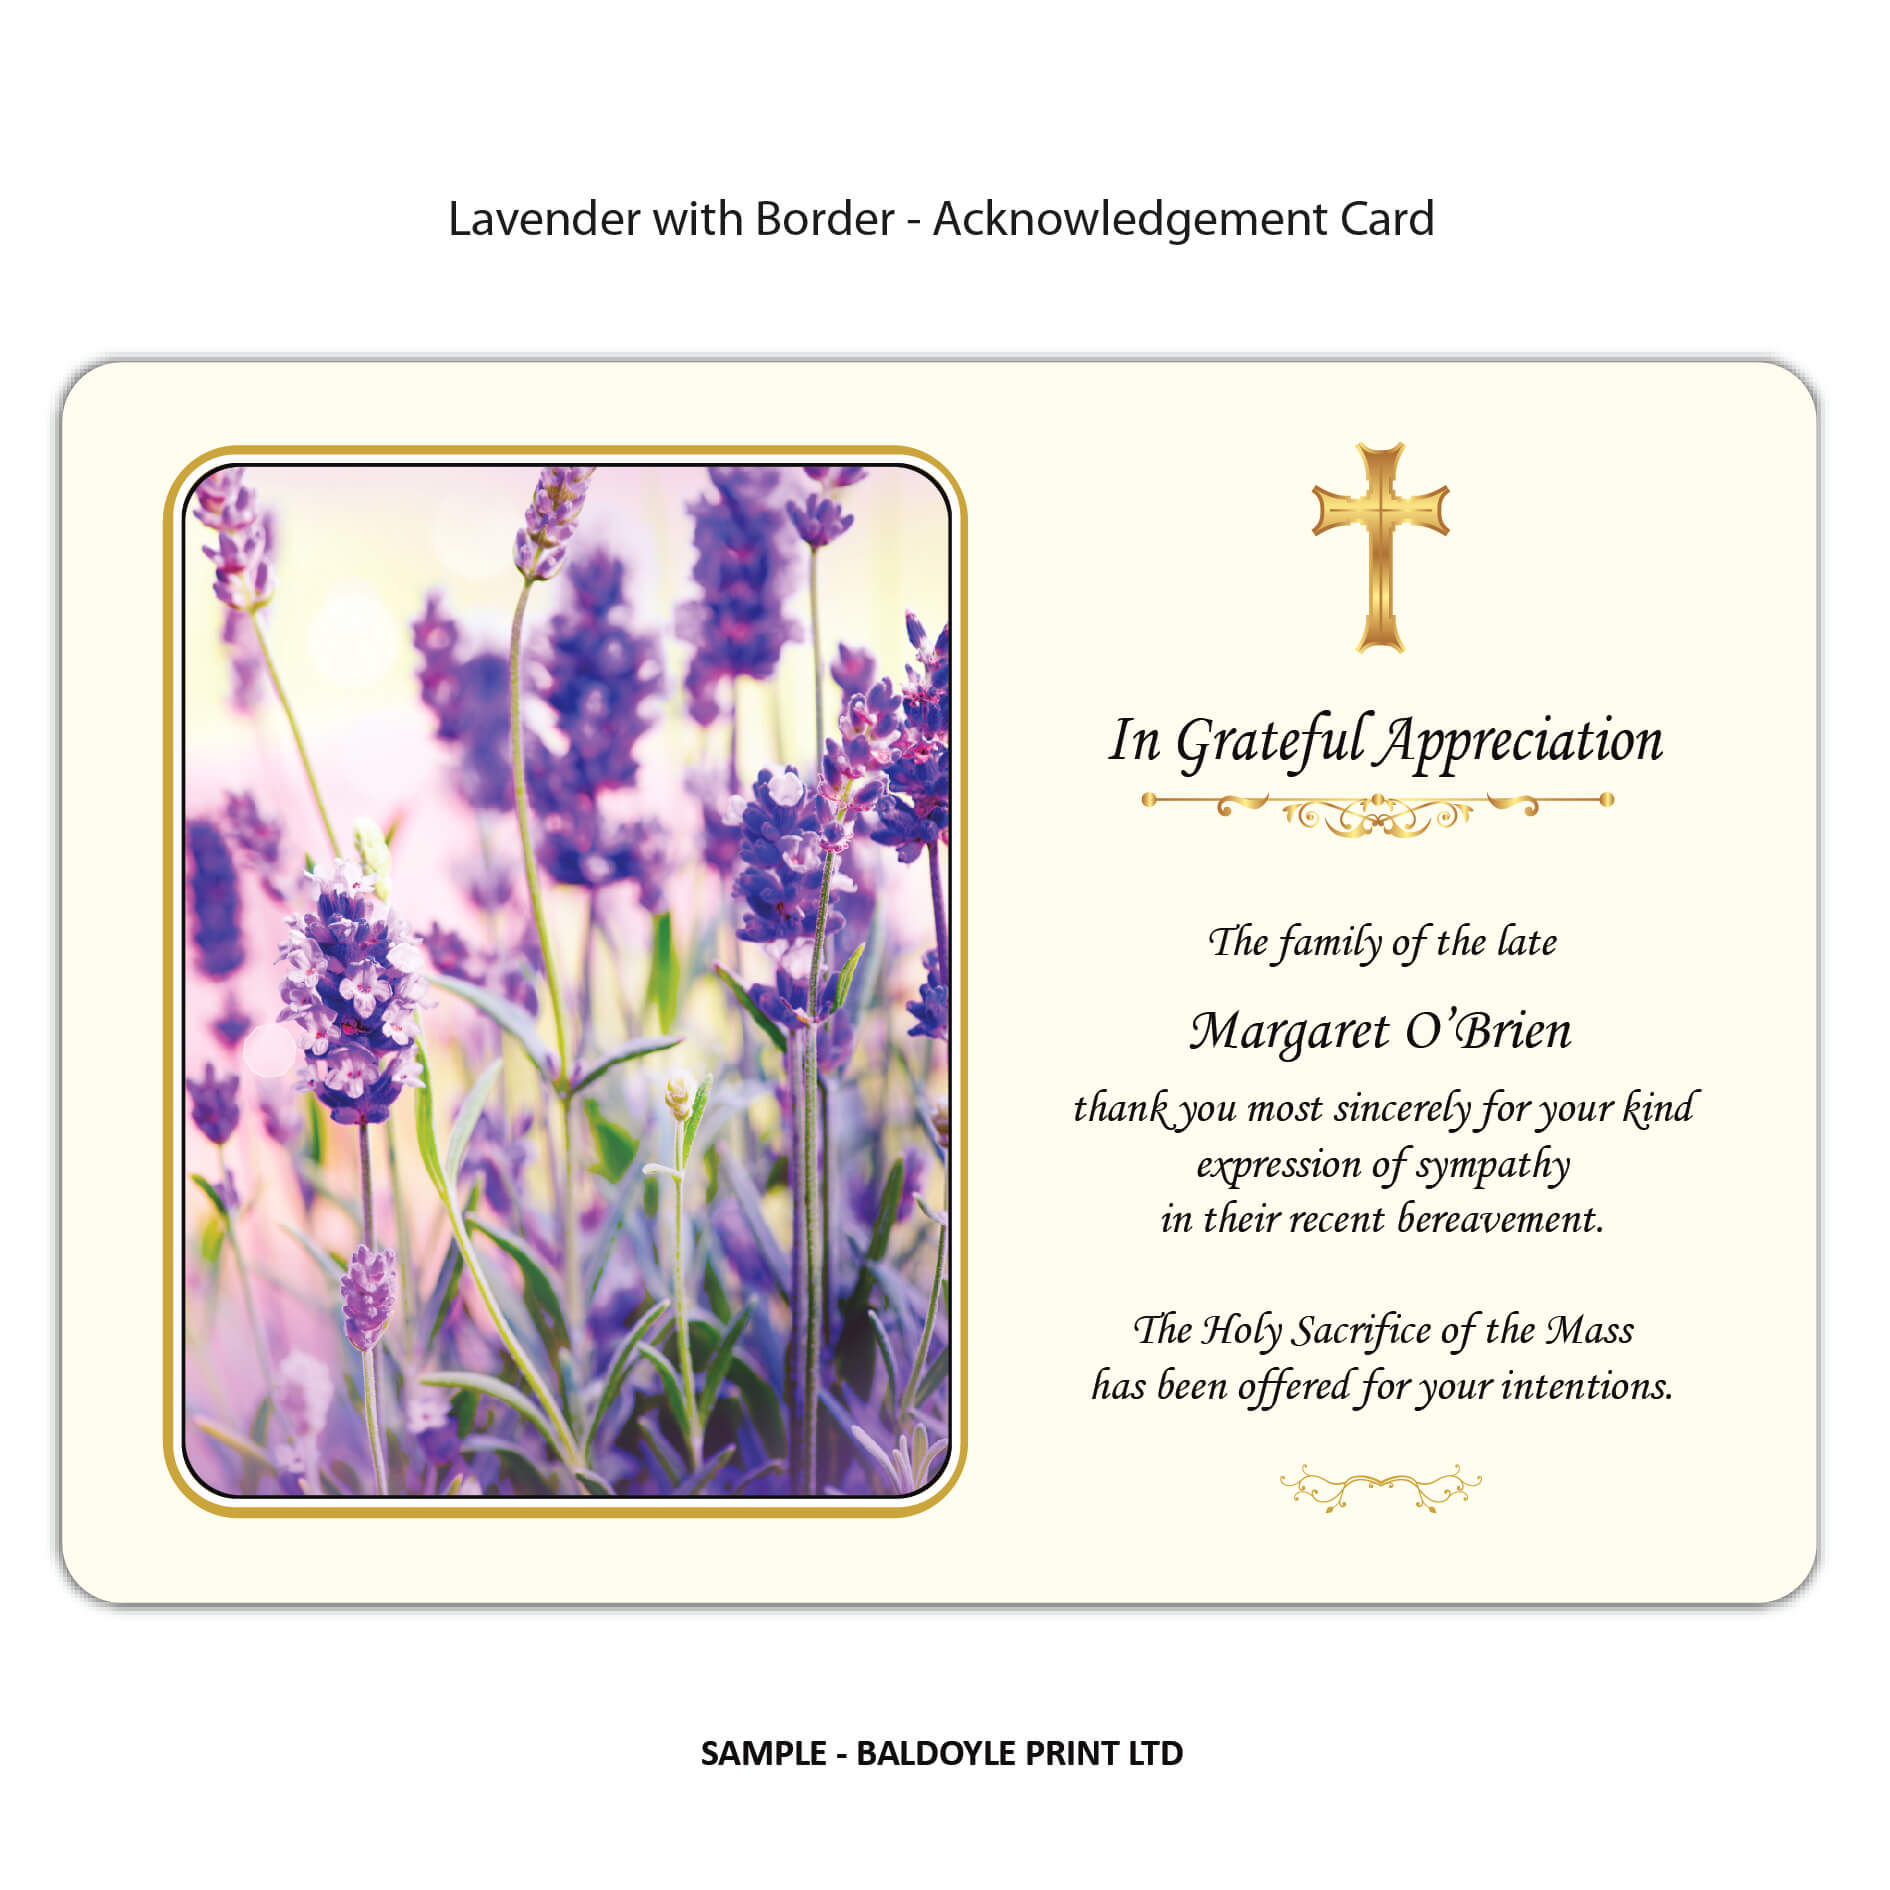 Lavender with Border Acknowledgement Card